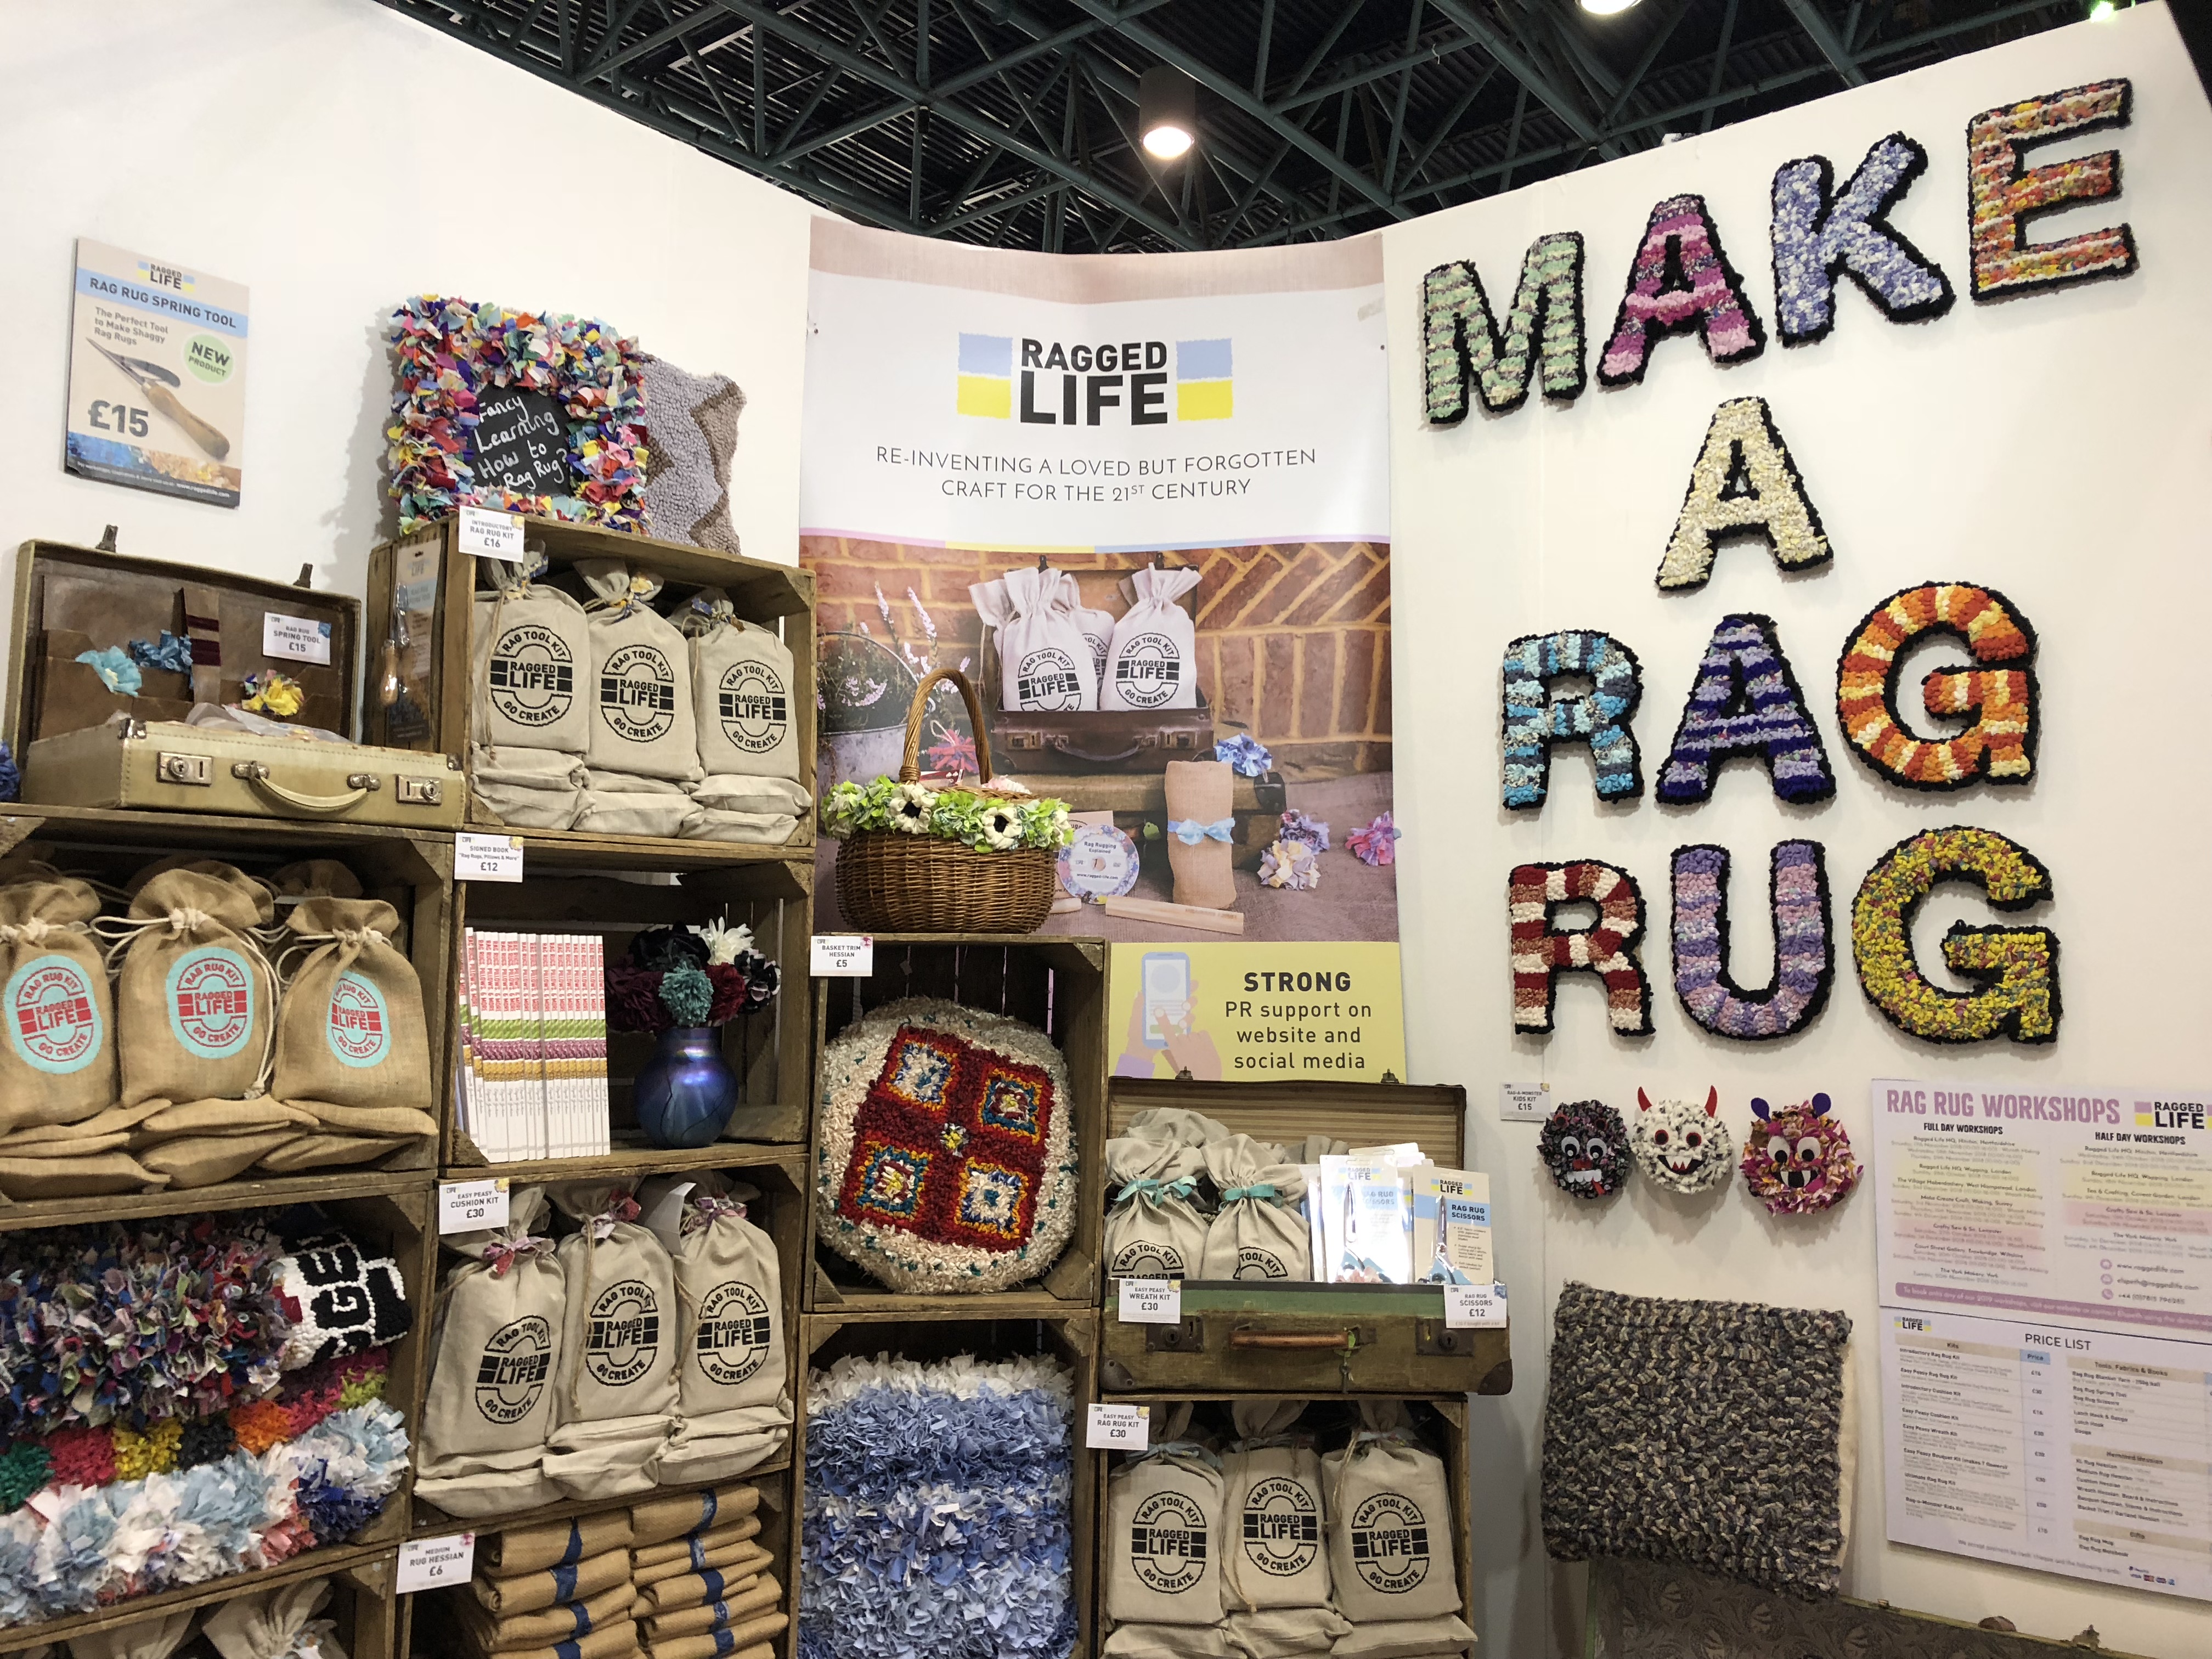 Ragged Life Rag Rug experts at the Knitting and Stitching Show in London